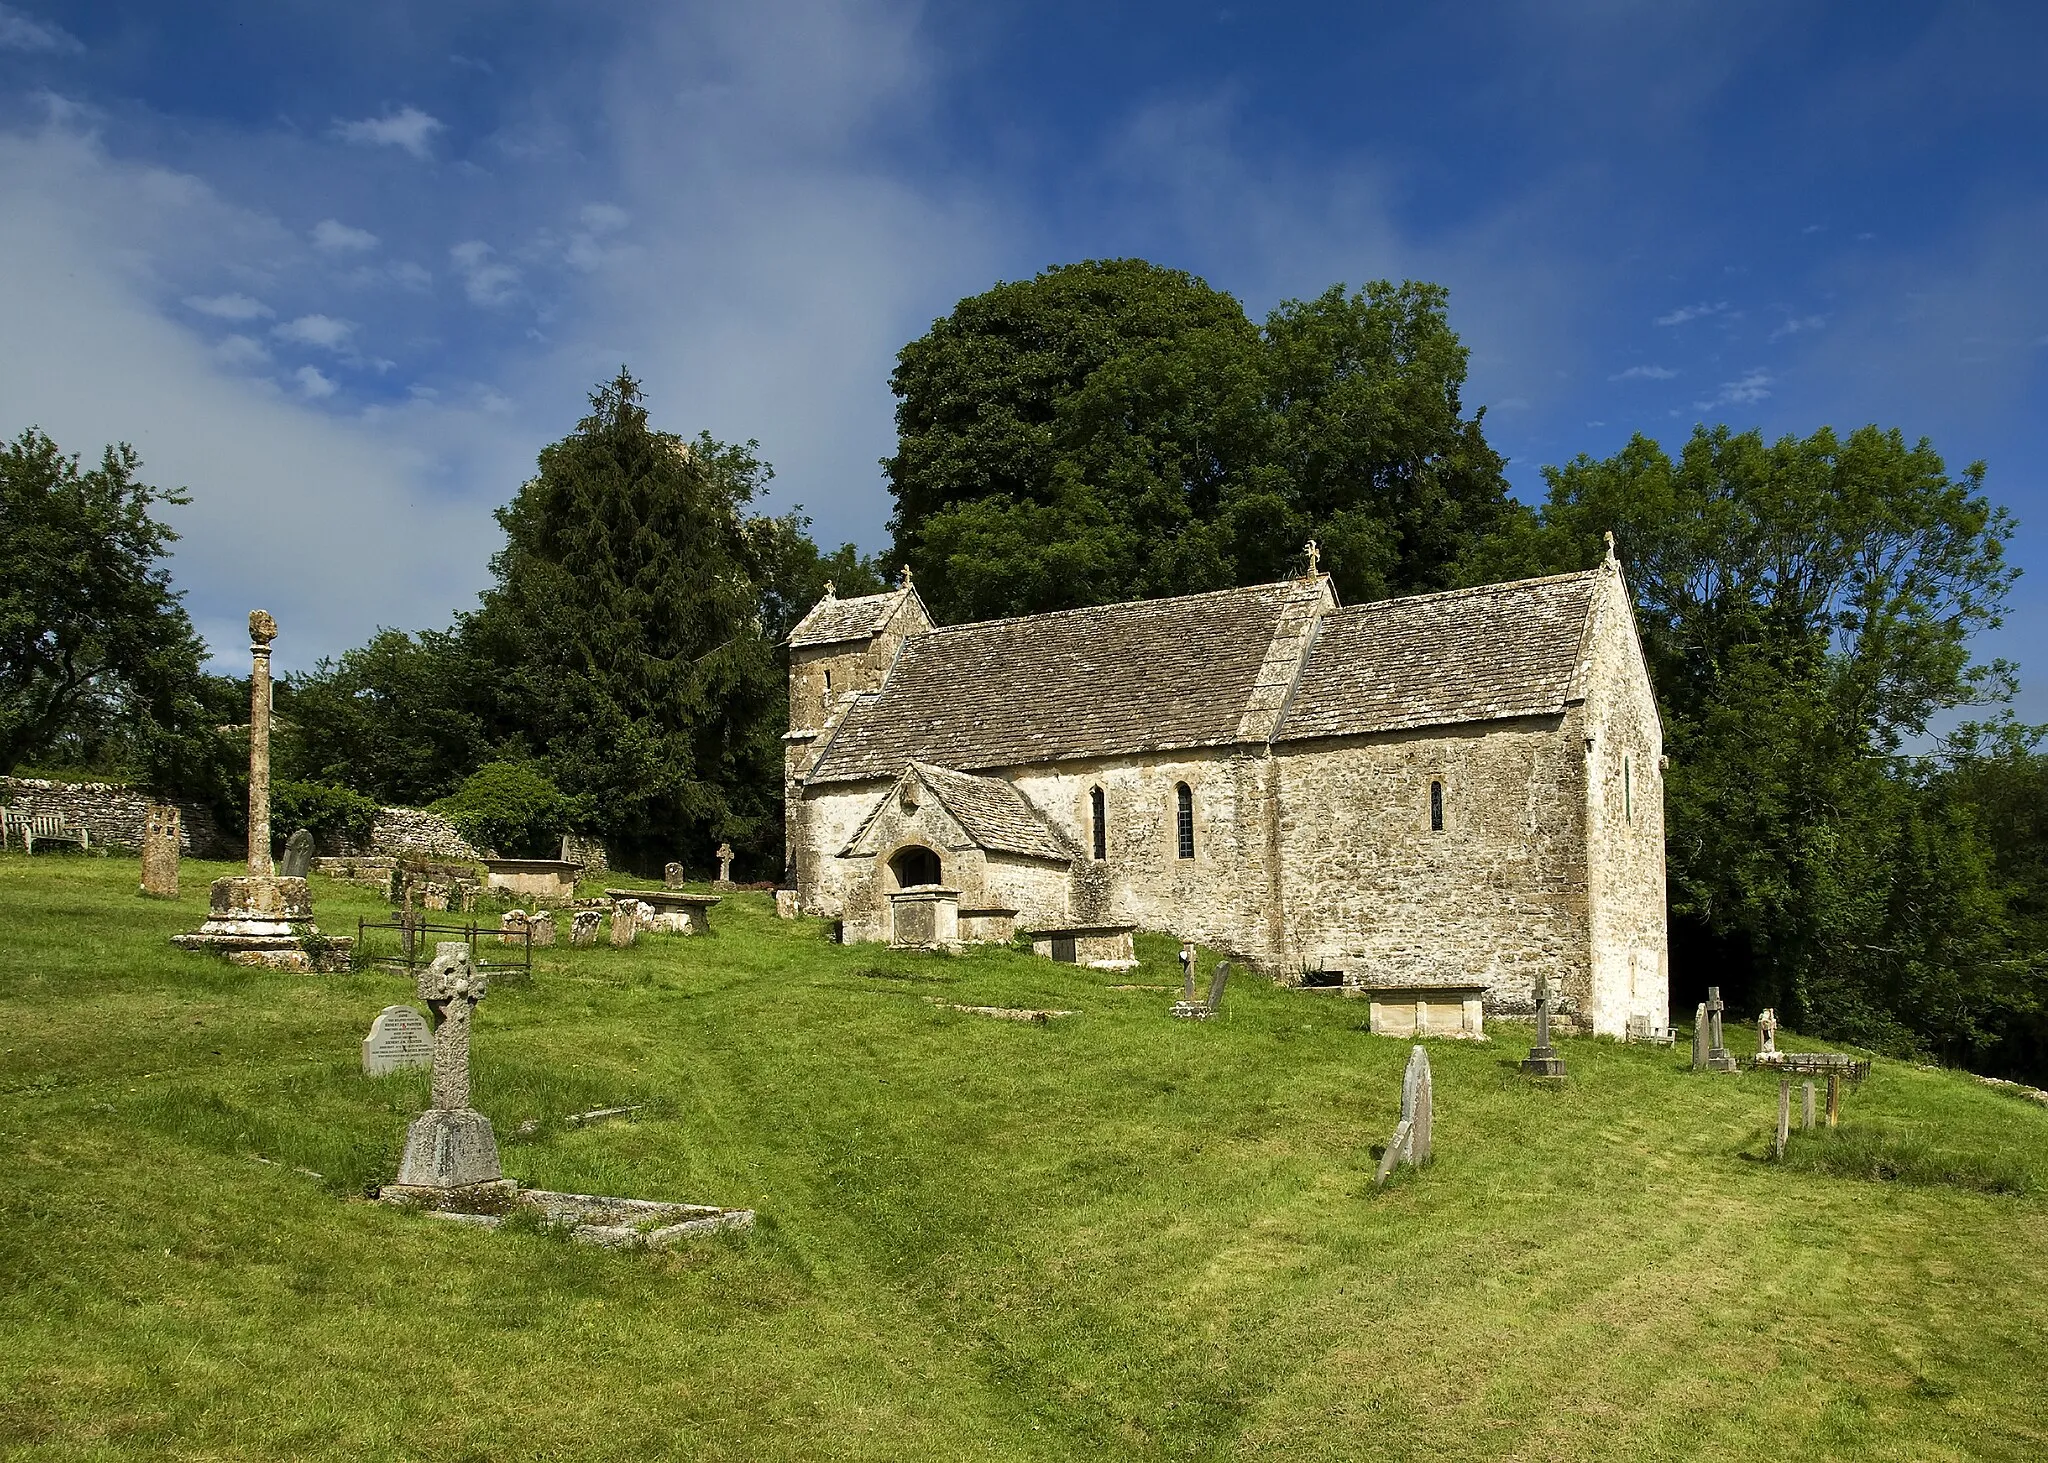 Photo showing: The church at Duntisbourne Rouse is dedicated to St. Michael and is located on the side of a hill overlooking the Dunt valley. The church dates from Saxon times and has been designated a Grade I listed building by English Heritage.